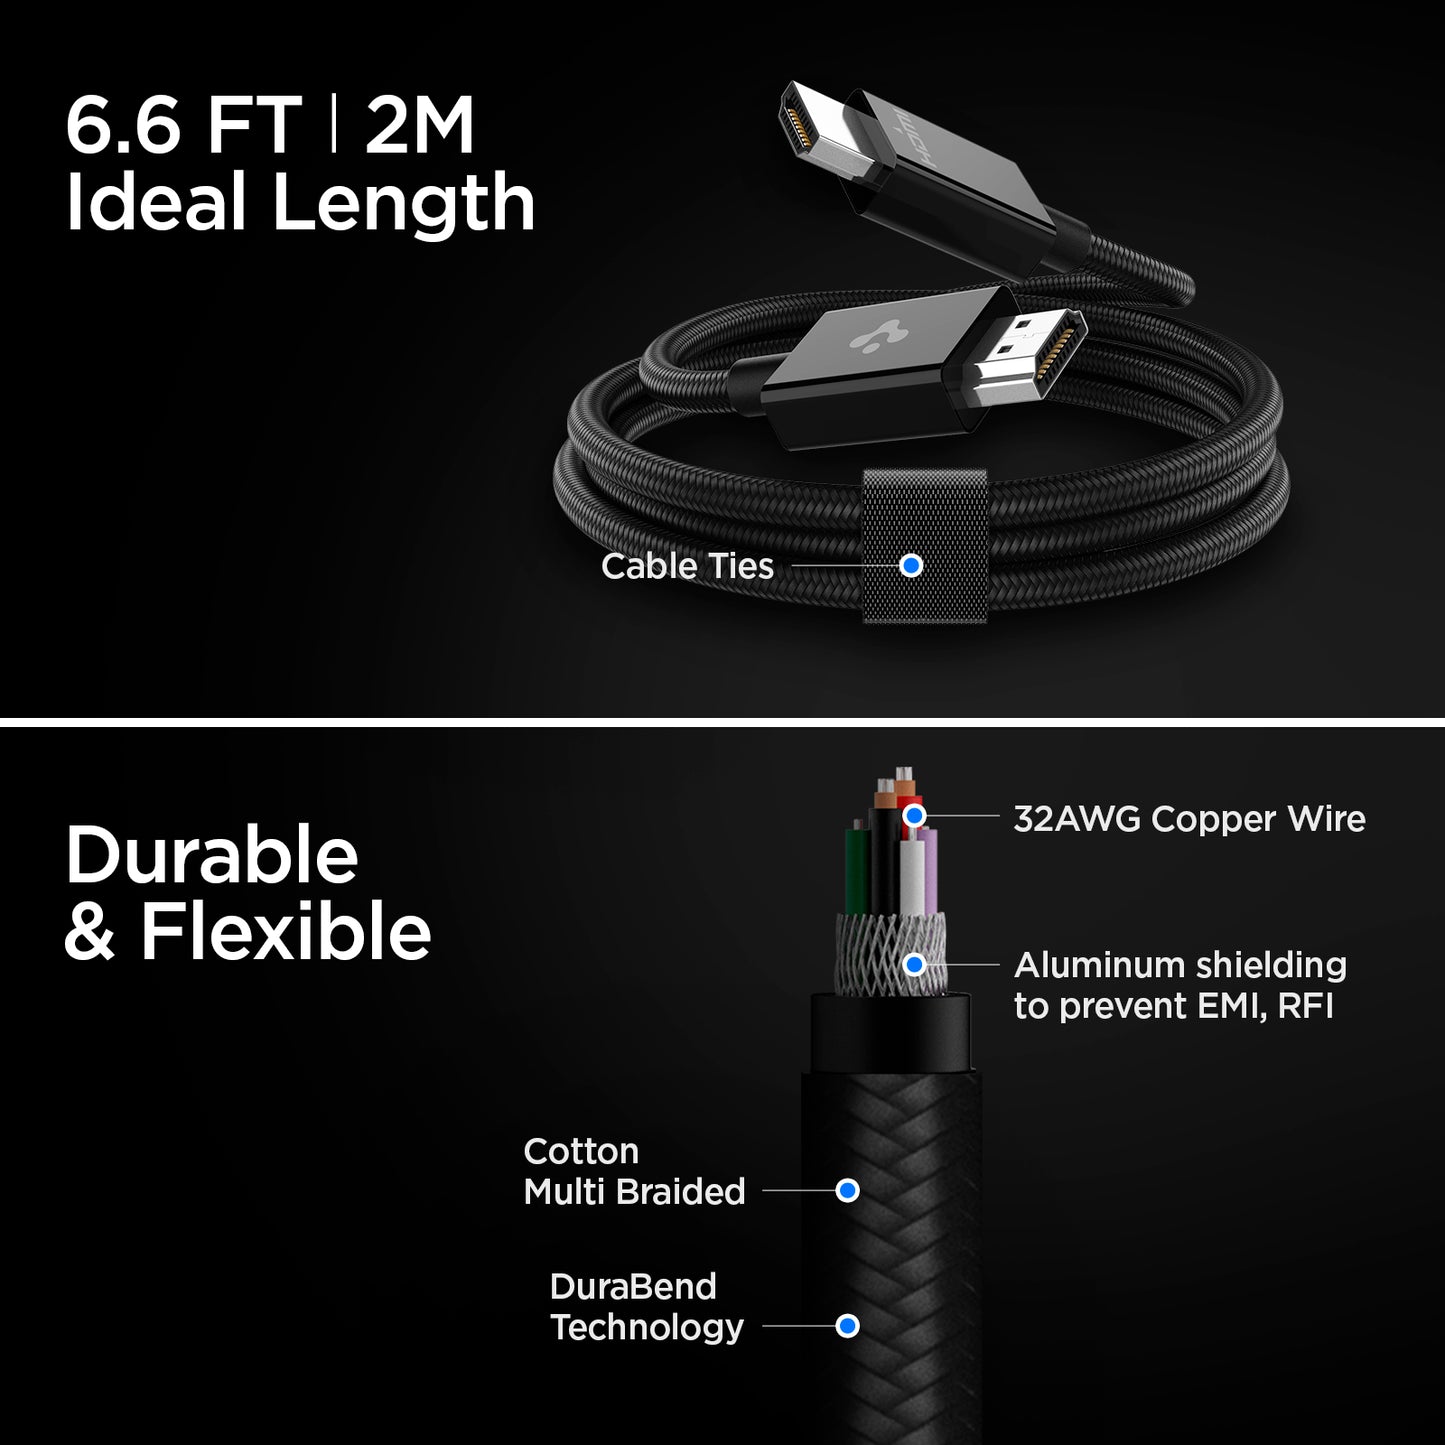 ACA02336 - ArcWire™ HDMI 2.1 Cable PB2001 in Black showing the 6.6 FT(2M) Ideal Length. A cable wire coiled and holds up by a cable ties. Durable & Flexible. Showing inside of a cable wire (32AWG Copper Wire, Aluminum shielding to prevent EMI, RFI, Cotton Multi Braided and DuraBend Technology)